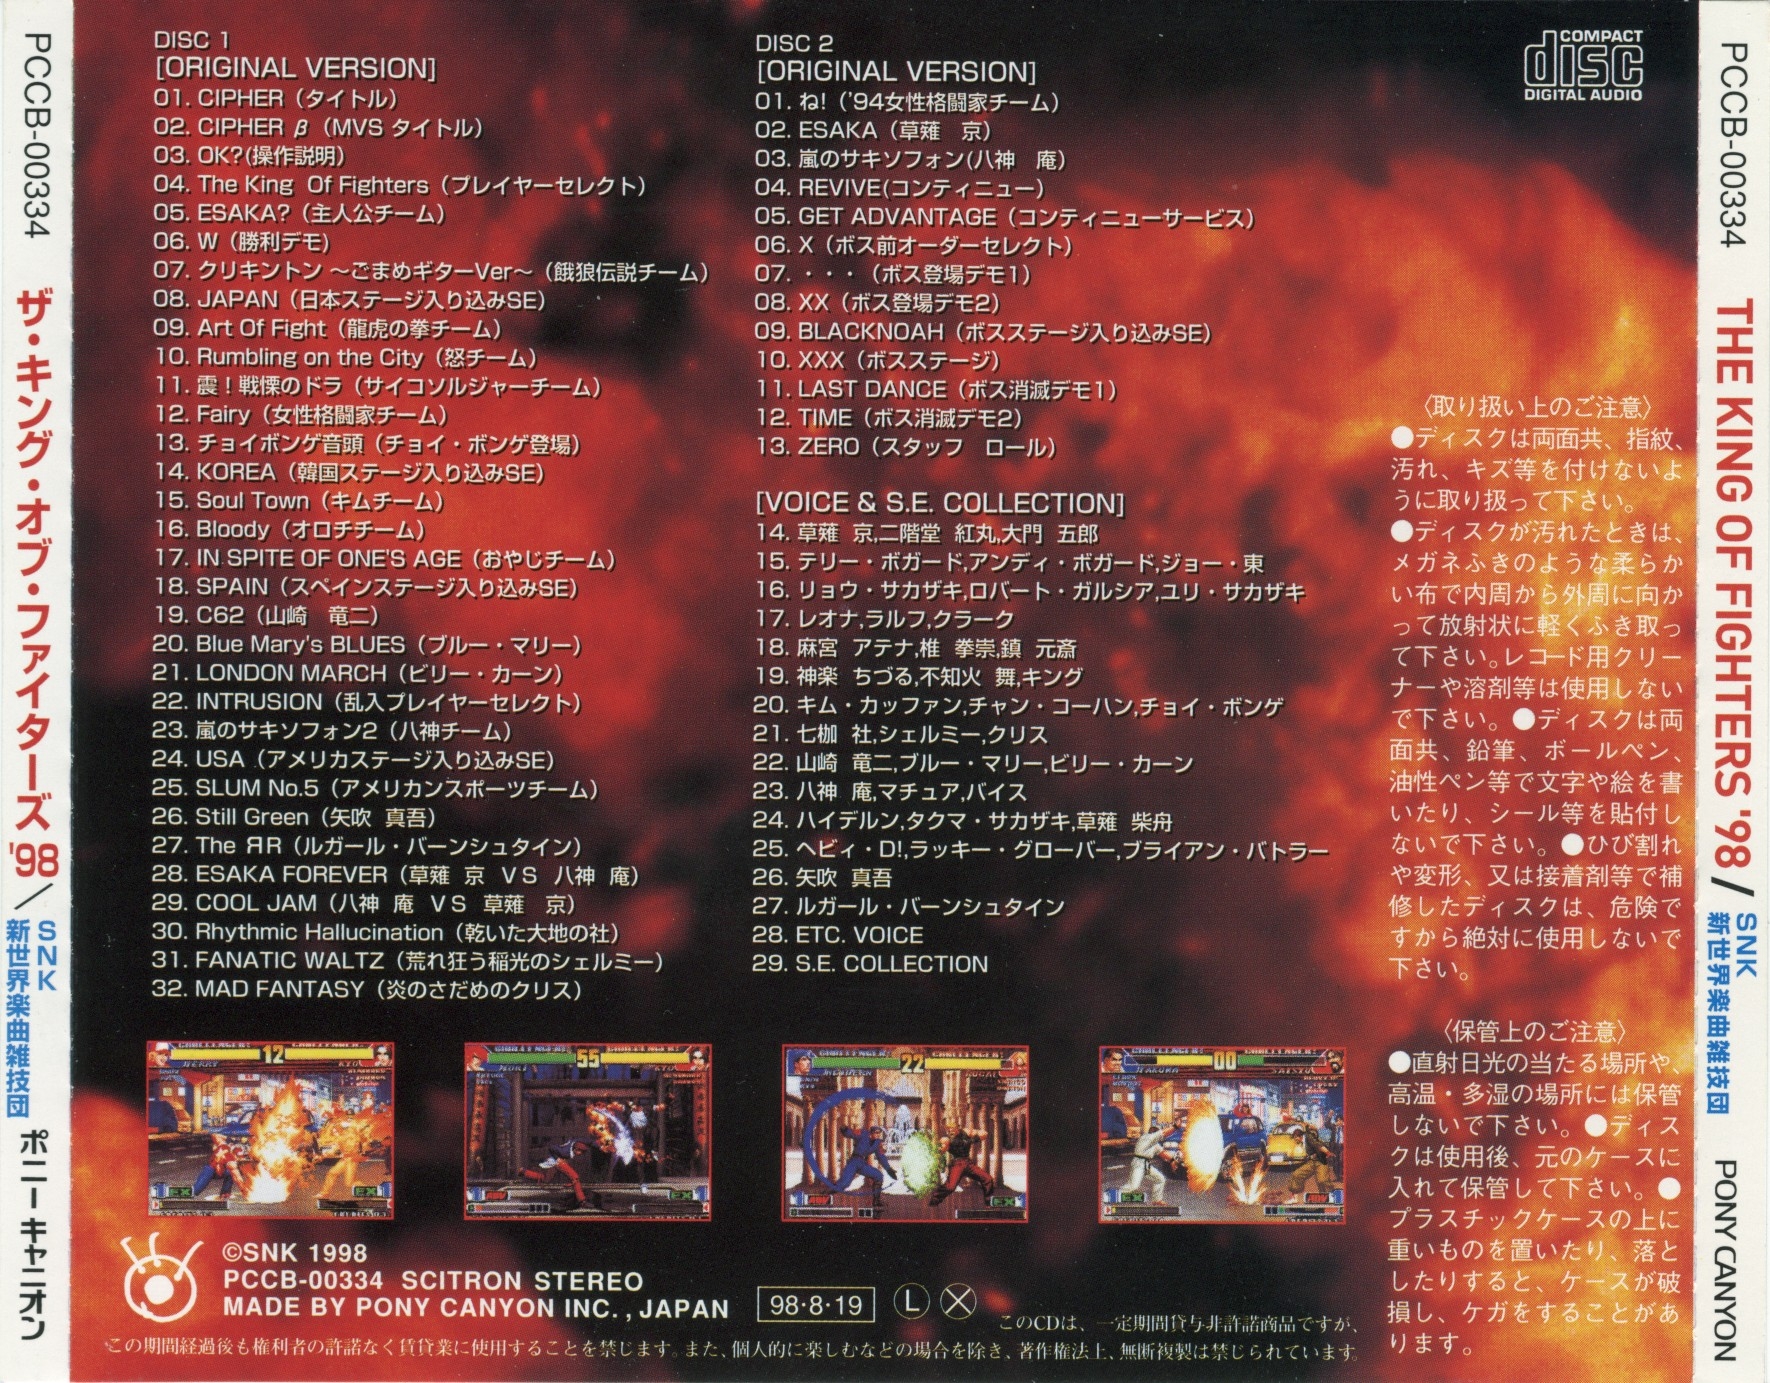 GS-016: THE KING OF FIGHTERS '98 The Definitive Soundtrack — Brave